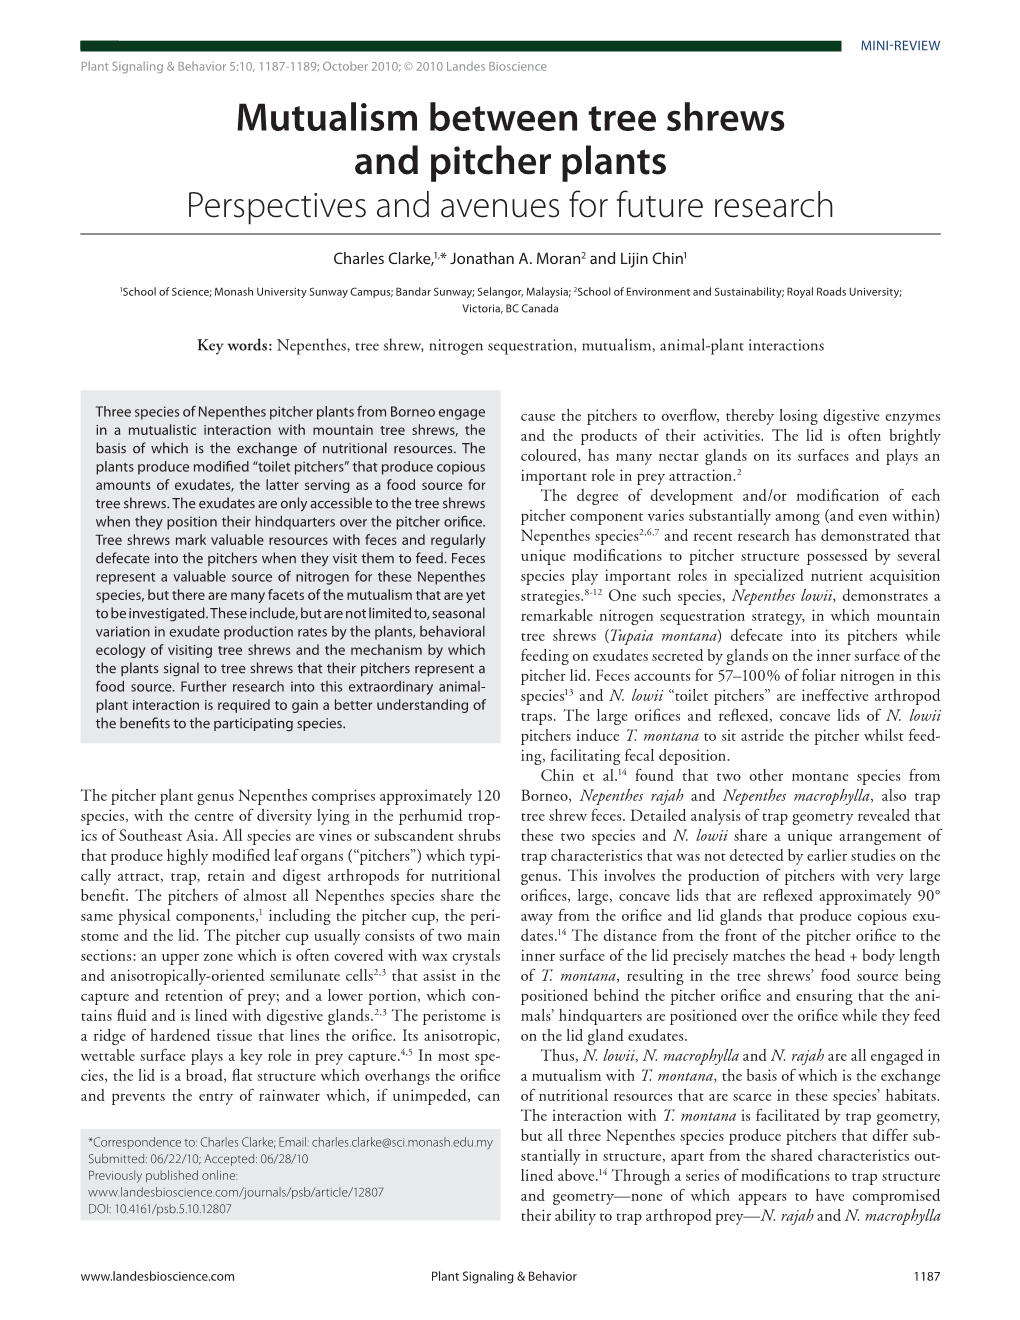 Mutualism Between Tree Shrews and Pitcher Plants Perspectives and Avenues for Future Research